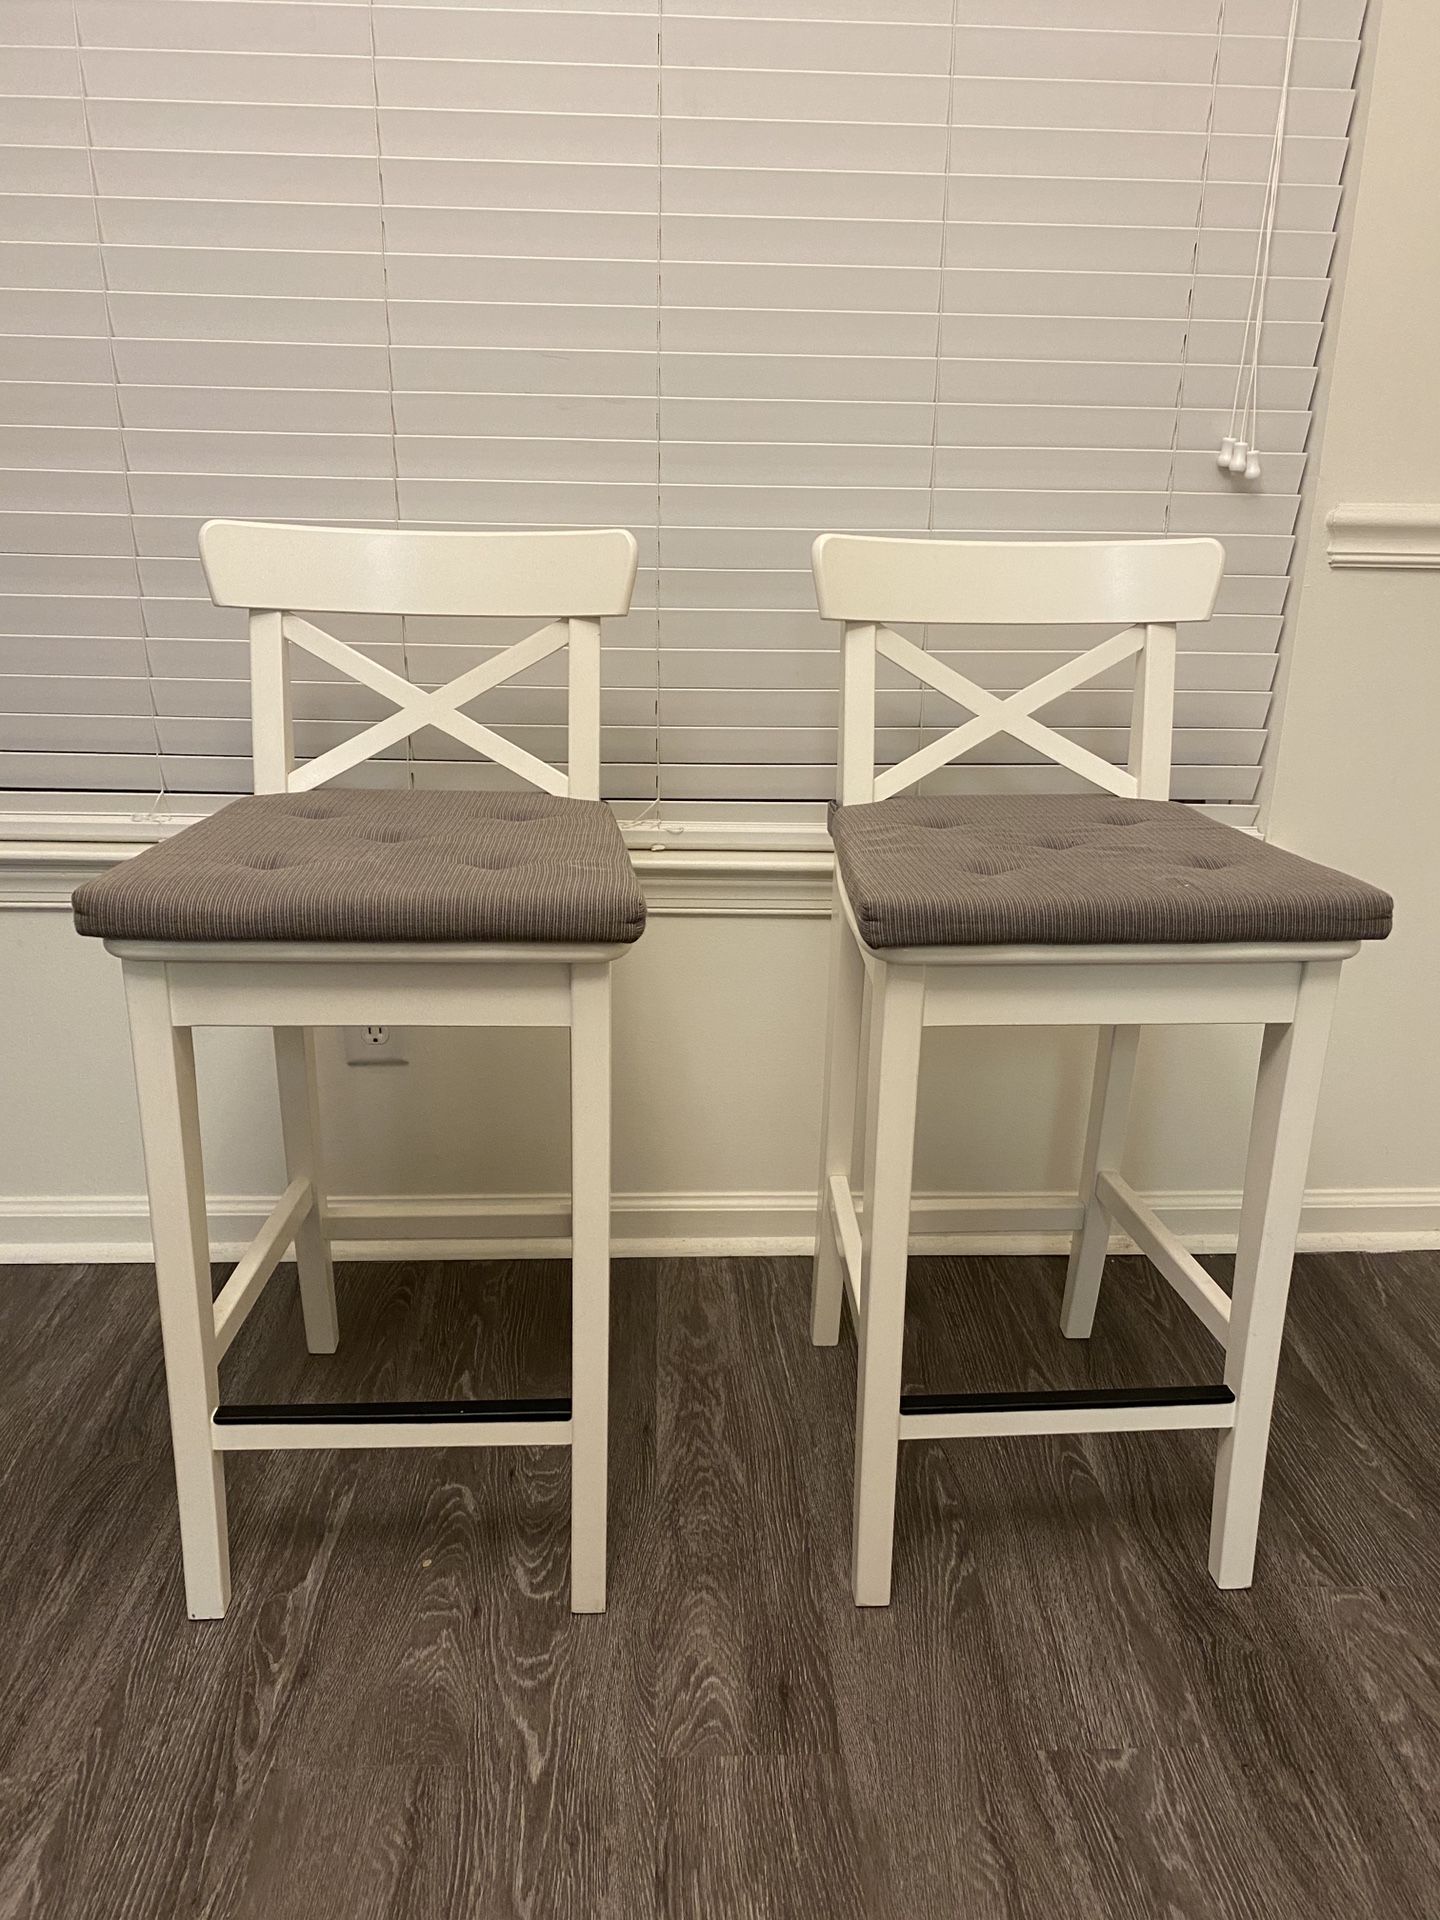 Quantity 2 Pre-owned IKEA White Counter Stools/chairs (comes with gray seat cushions) Approximate Dimensions Seat height 25” Back rest height: 36”